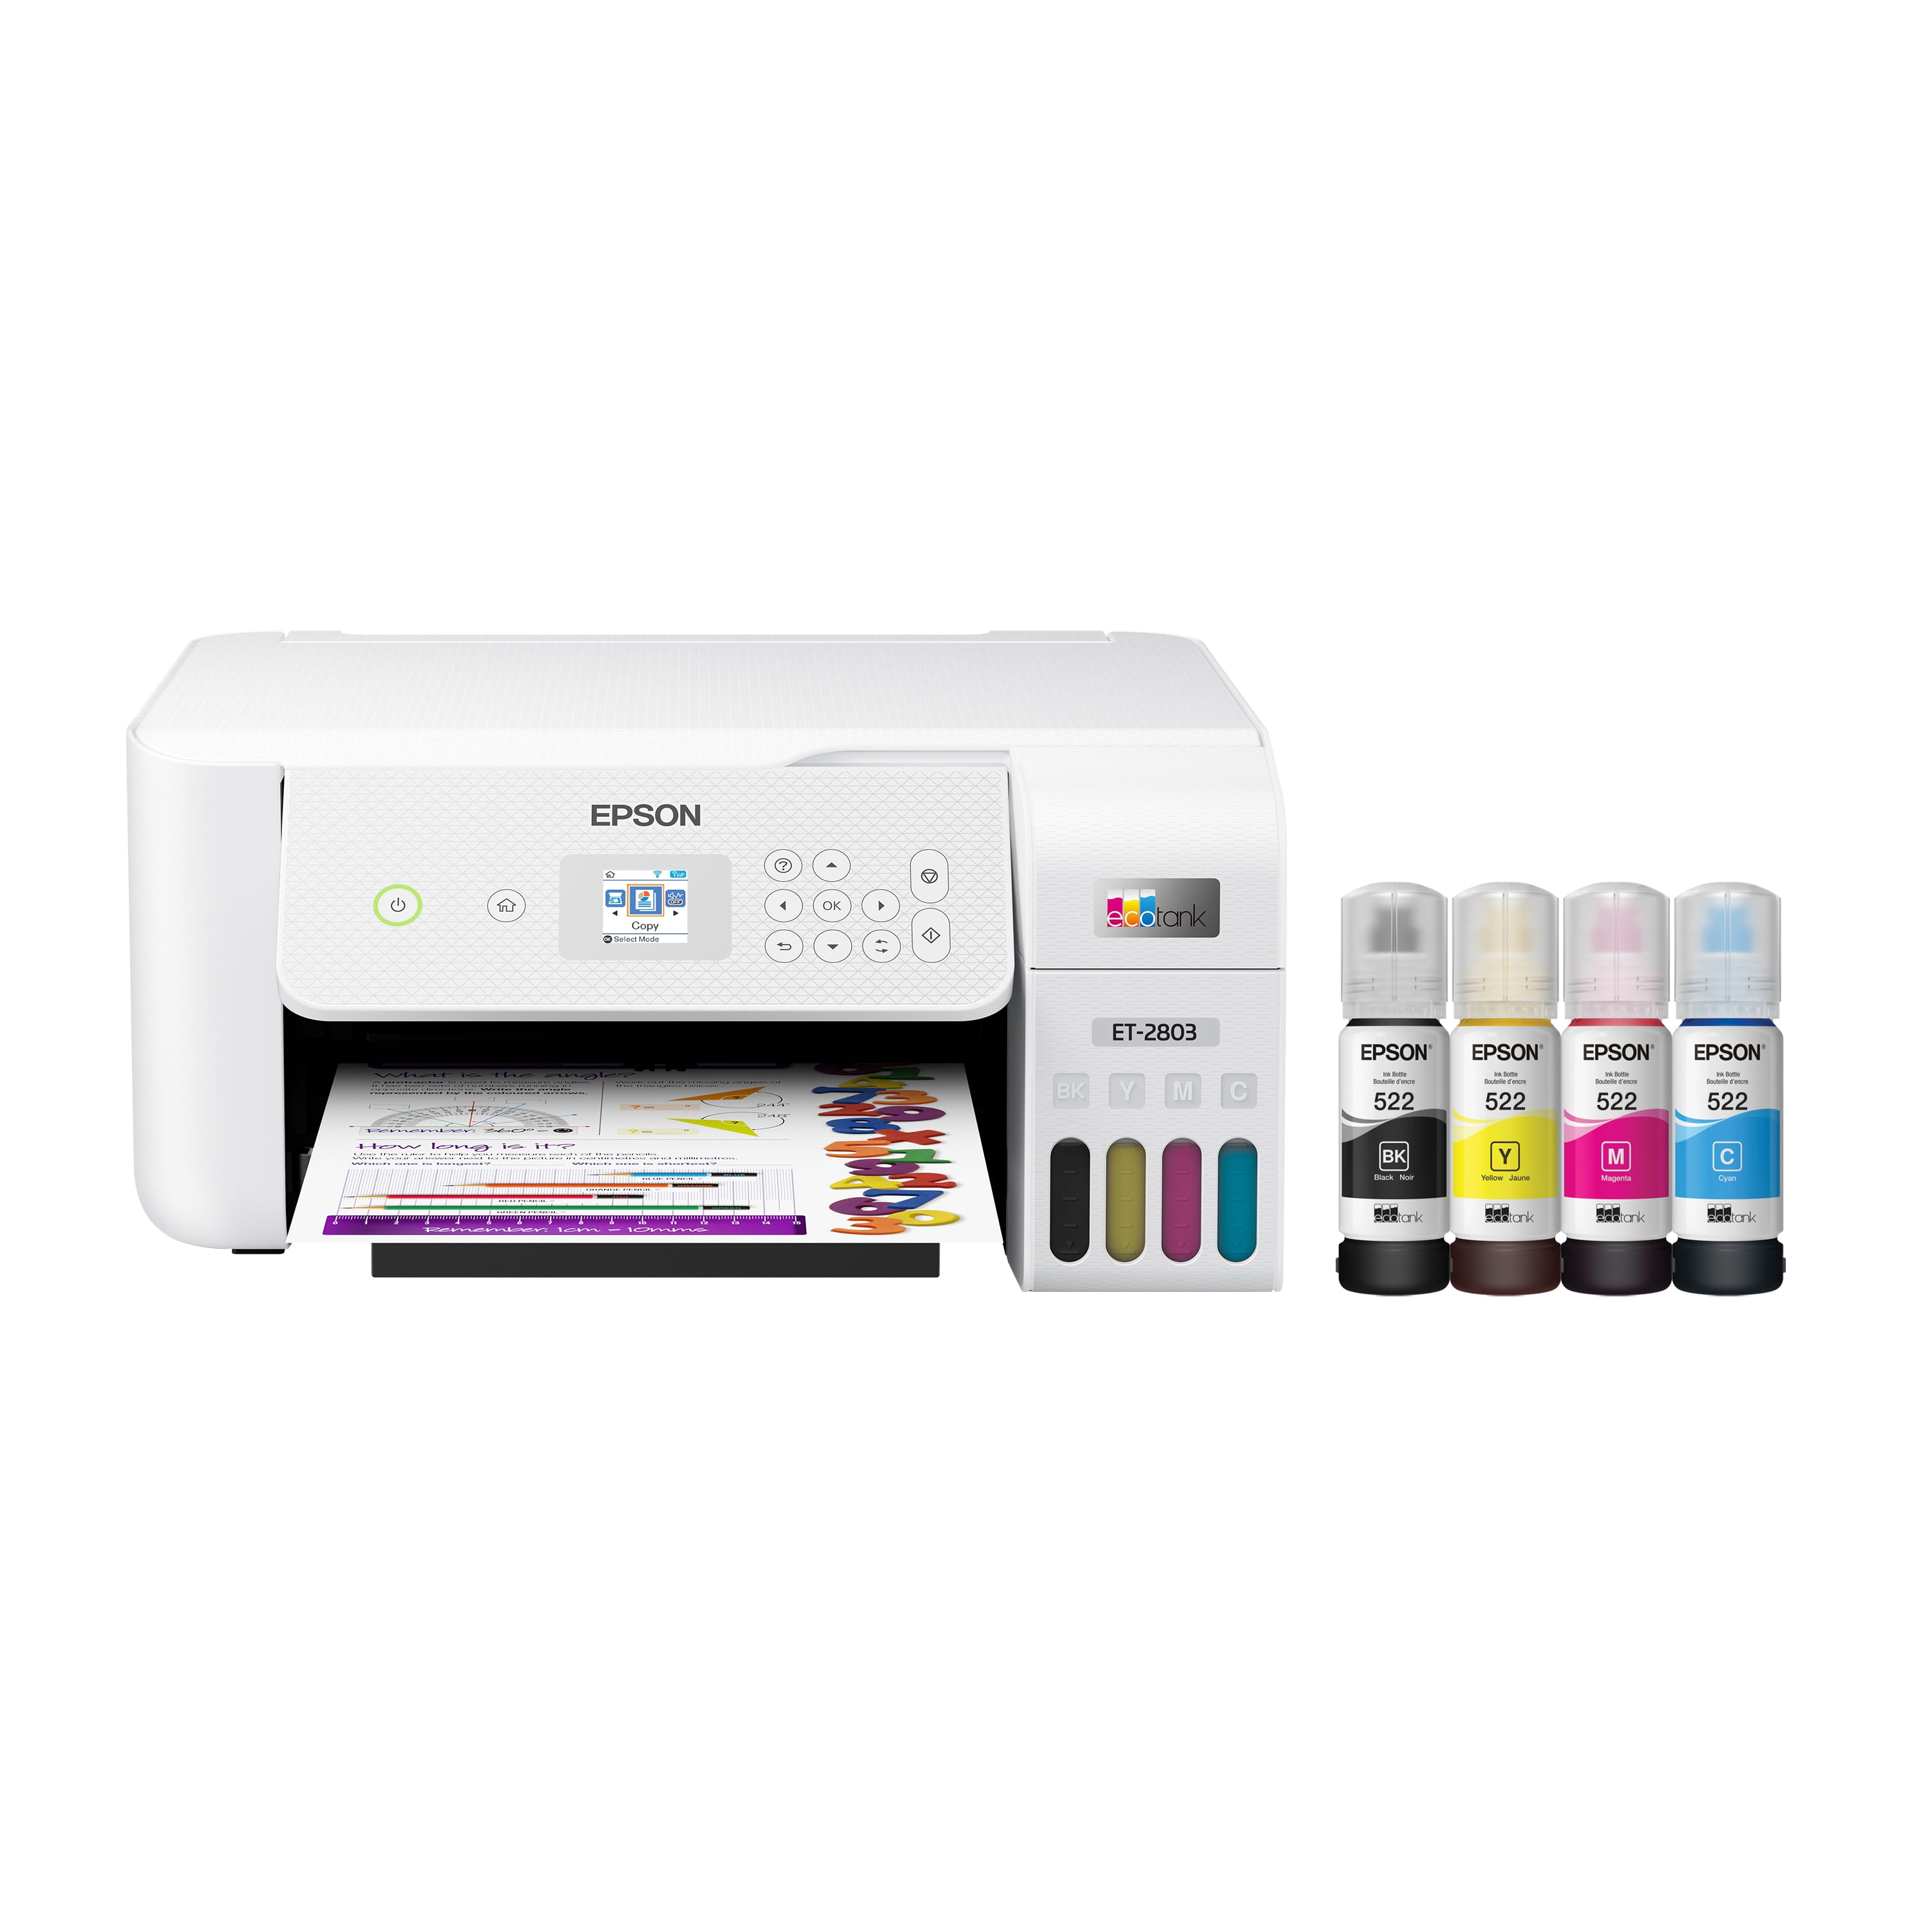 EPSON C11CD31201 Expression Premium XP-610 Wireless Color Photo Printer  with Scanner and Copier